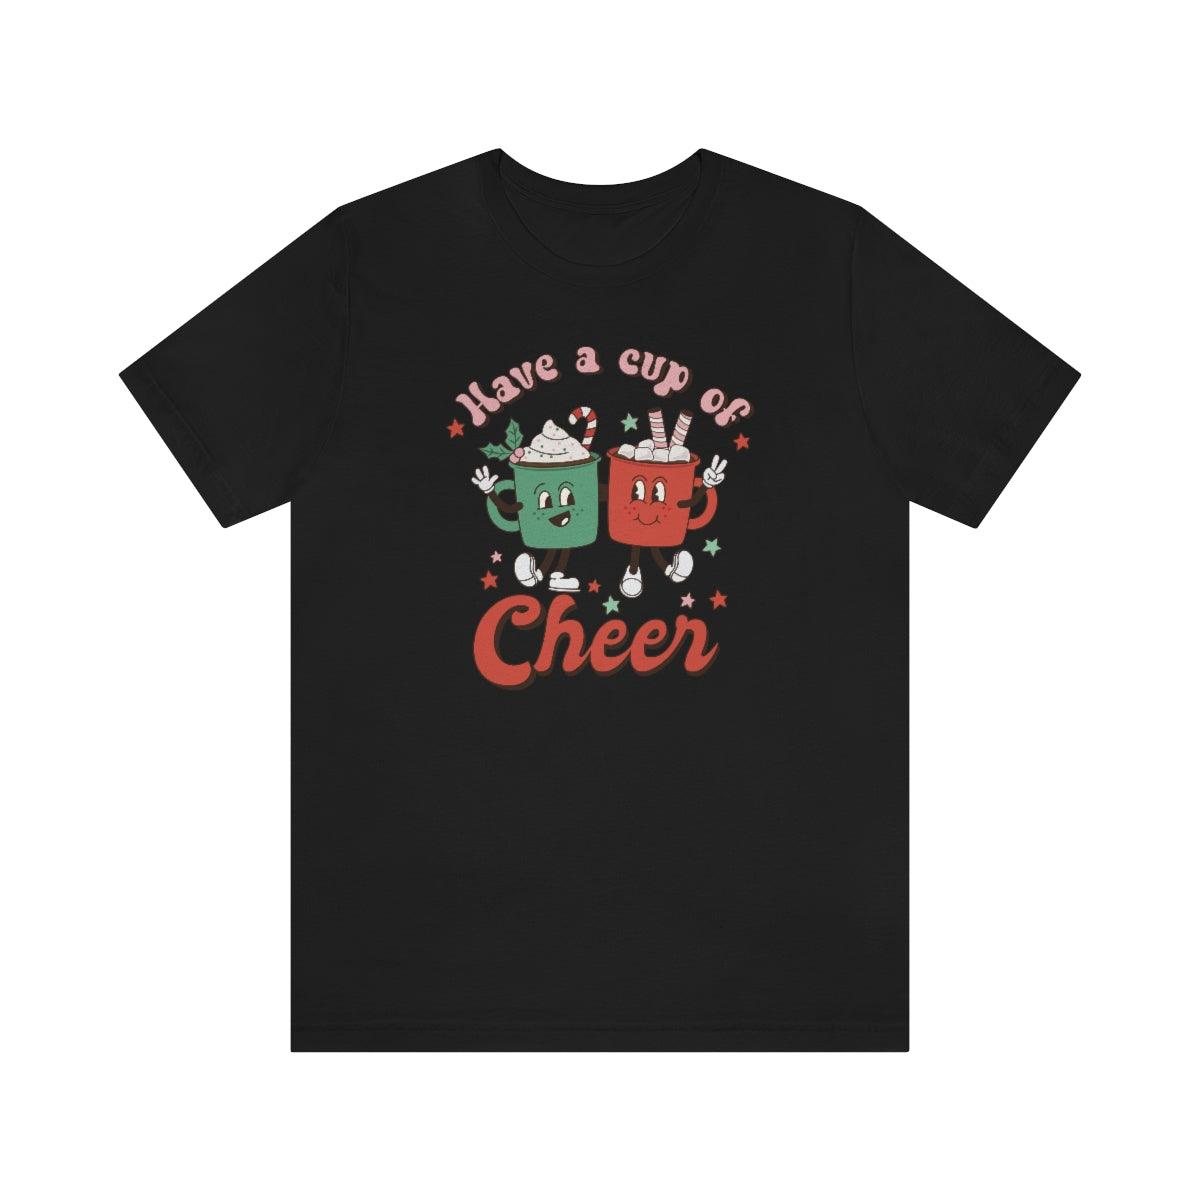 Retro Have a Cup of Christmas Cheer Christmas Shirt Short Sleeve Tee - Crystal Rose Design Co.